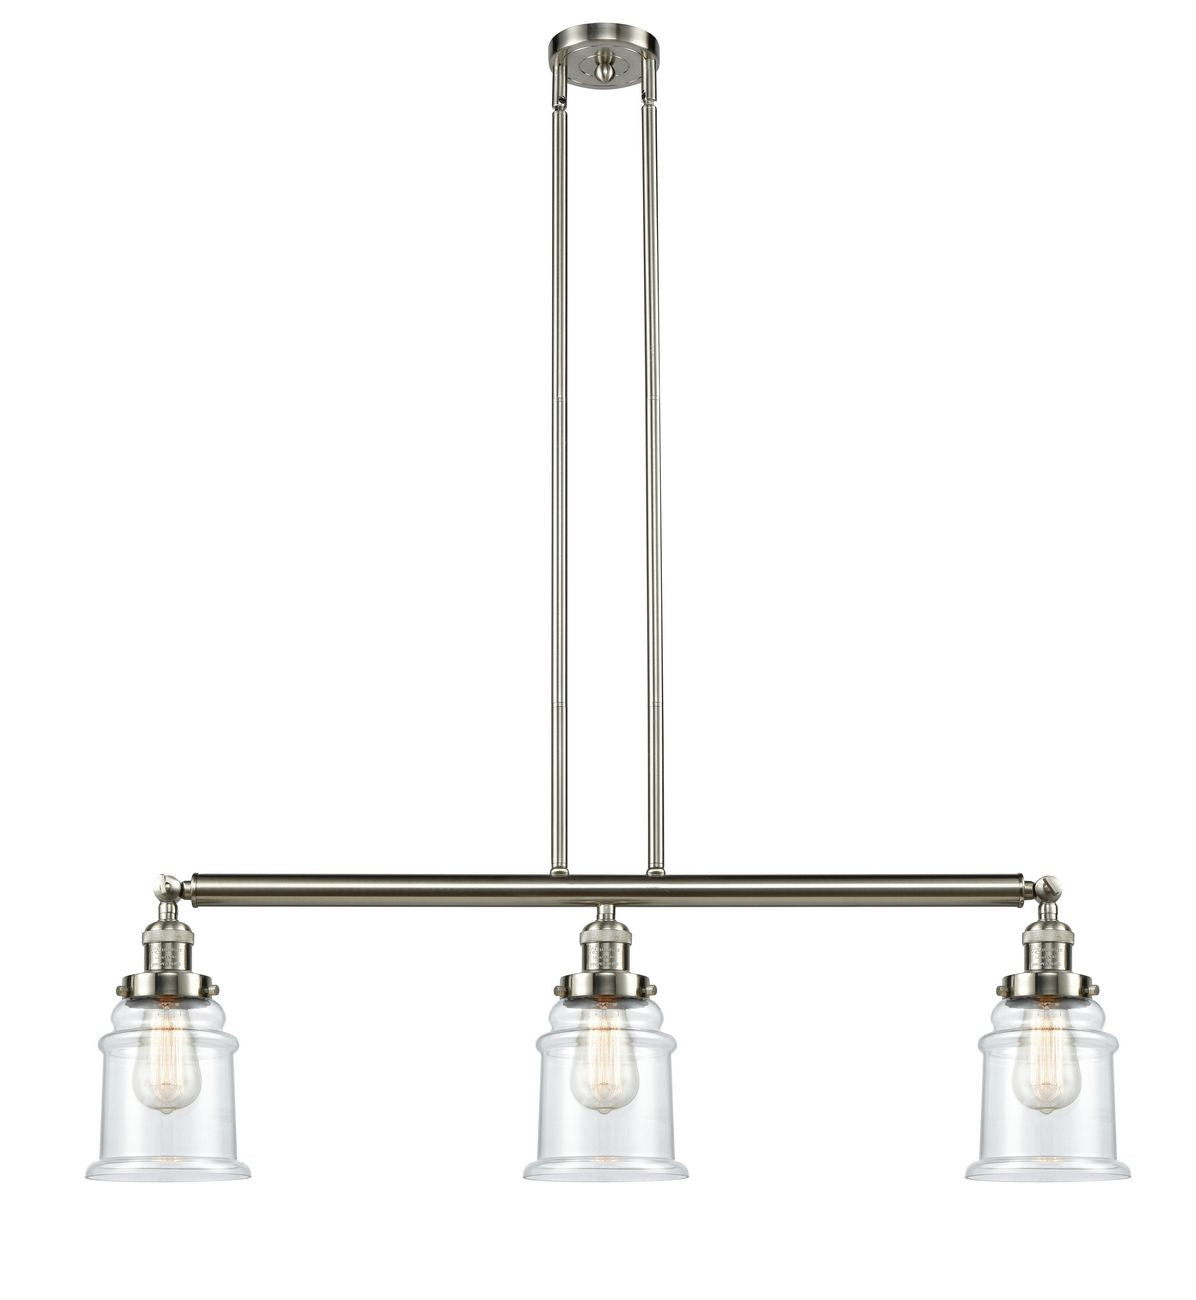 213-SN-G182 3-Light 38.5" Brushed Satin Nickel Island Light - Clear Canton Glass - LED Bulb - Dimmensions: 38.5 x 6 x 11<br>Minimum Height : 21.5<br>Maximum Height : 45.5 - Sloped Ceiling Compatible: Yes